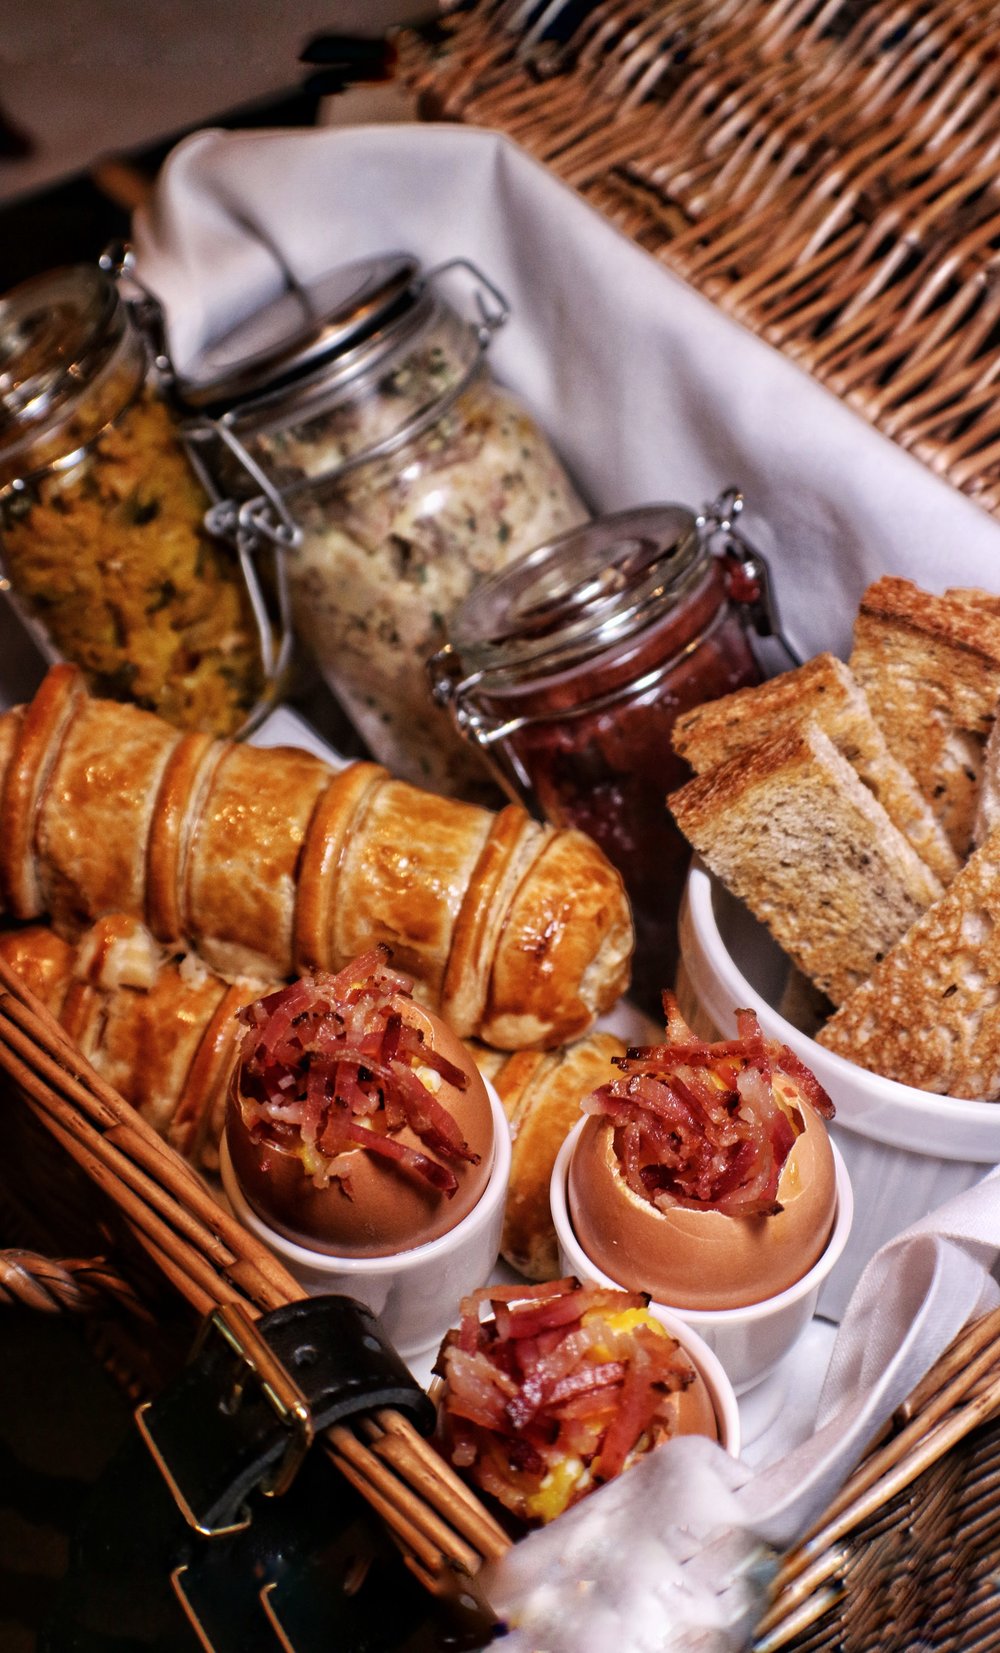  &nbsp;“Pignic Basket” sausage roll, ham hock, eggs and soldiers, piccalilli 3 